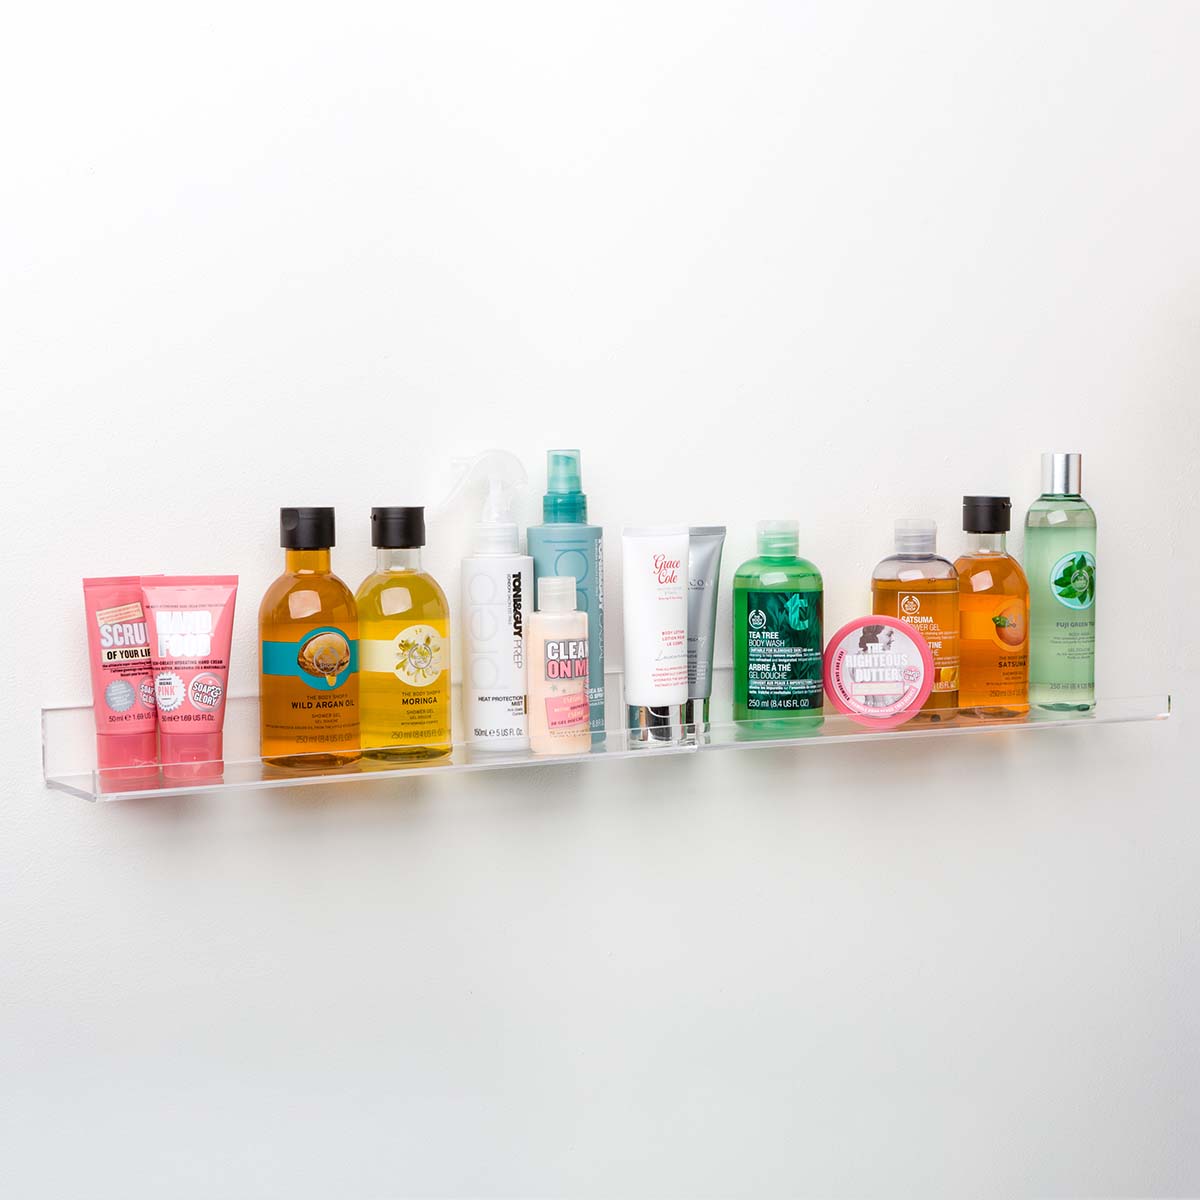 Invisible' Bathroom Organizer Wall Mounted or Free-Standing Luxury Bathroom  Decor. 15” Clear Acrylic Bathroom Shelf with 3 Sections for Toiletries  Makeup Toothbrushes & Over The Toilet Storage - Pretty Display: Making Your